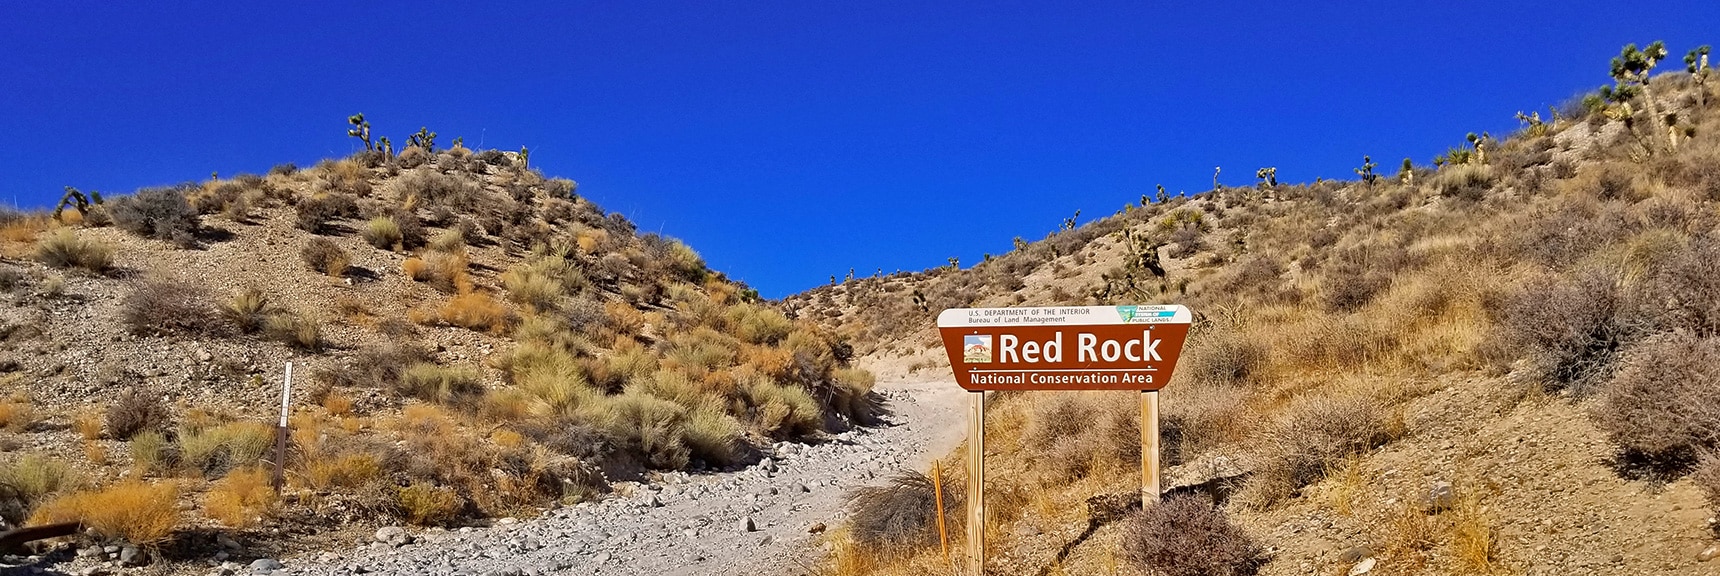 Entrance to Lucky Strike Road Off Kyle Canyon Road | Angel Peak via Lucky Strike Road | Mt Charleston Wilderness | Spring Mountains, Nevada